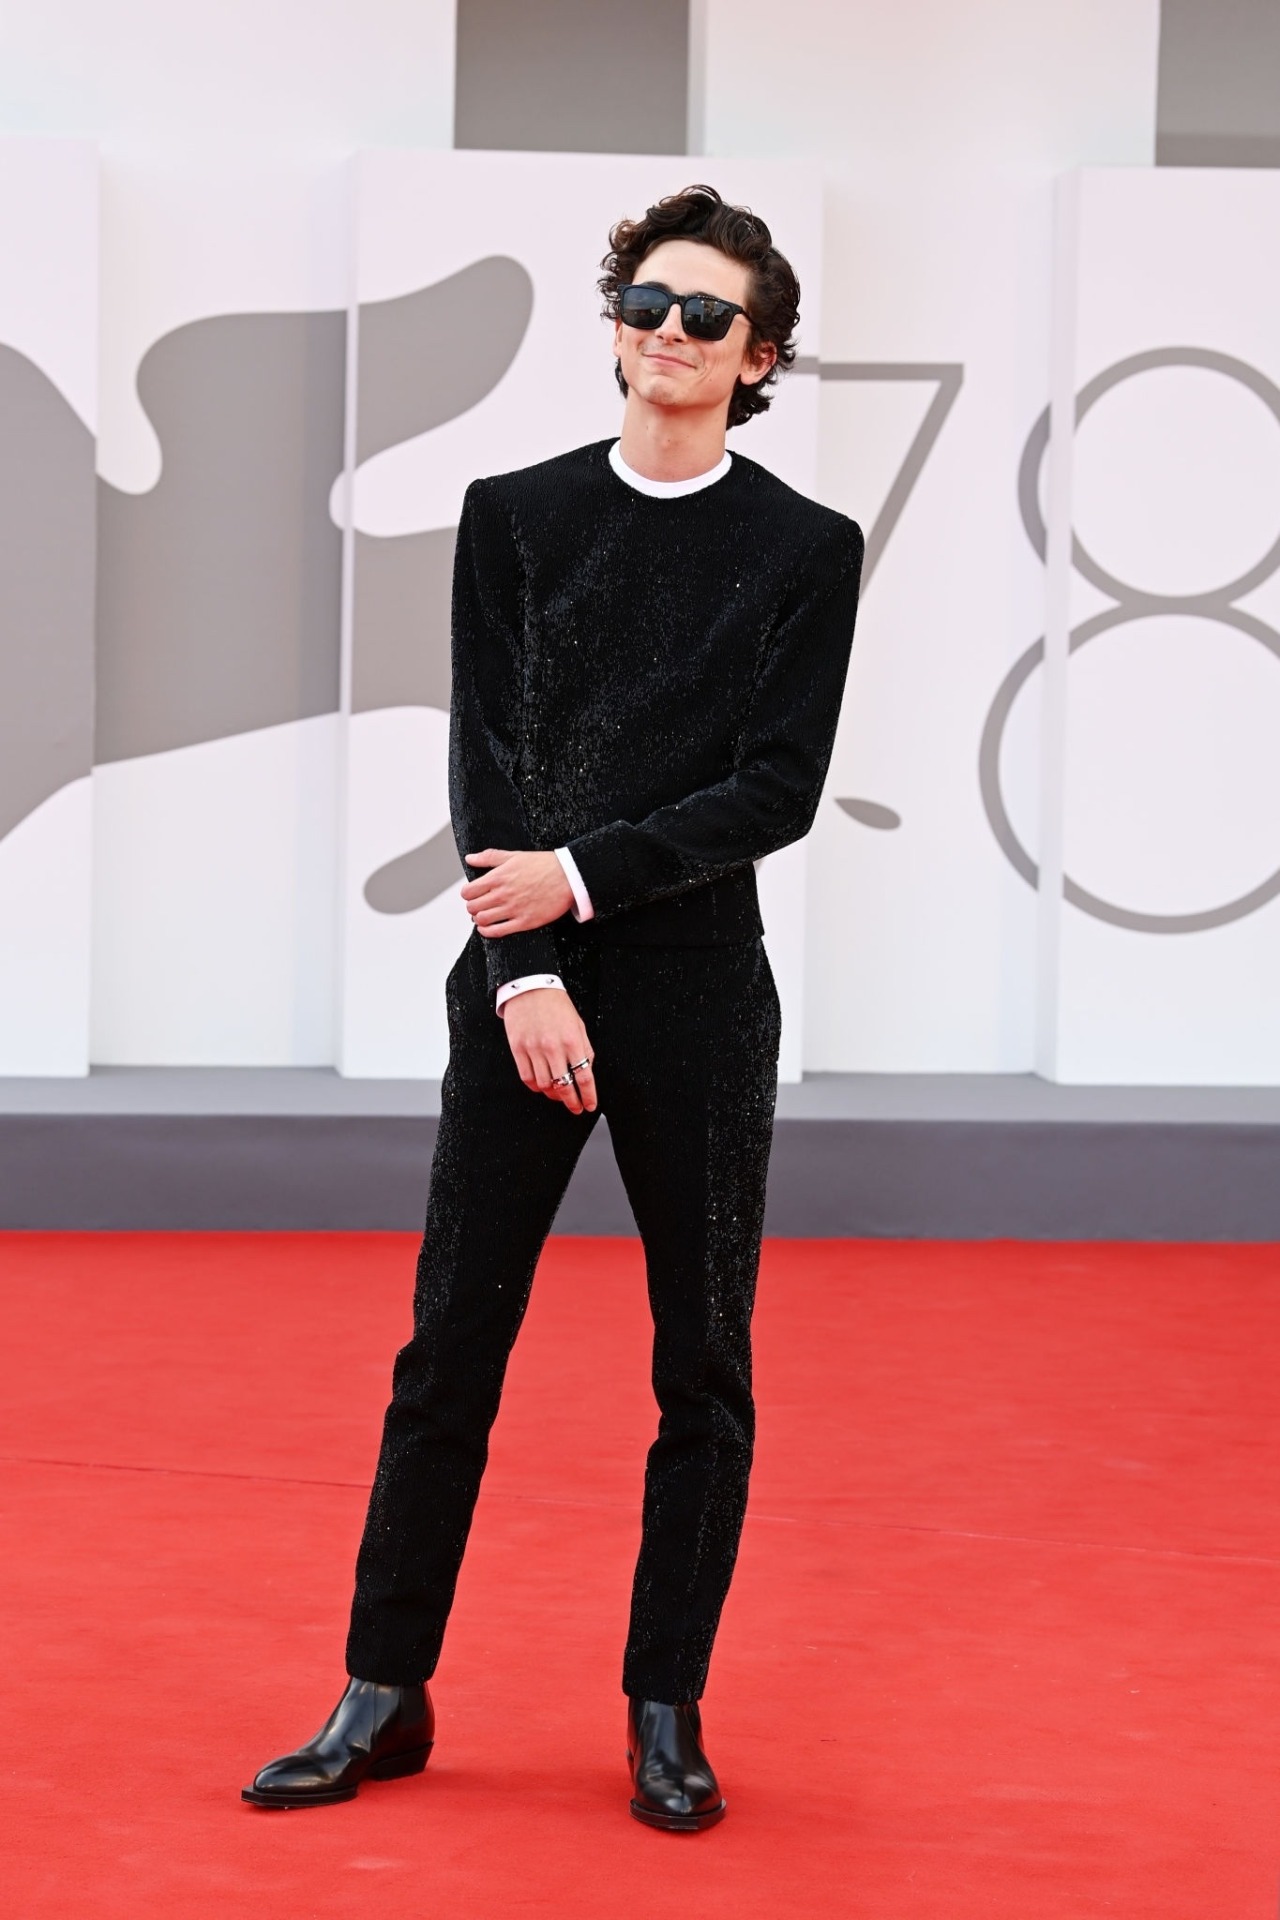 is this a memory? — Timothée Chalamet at Dune premiere at Venice